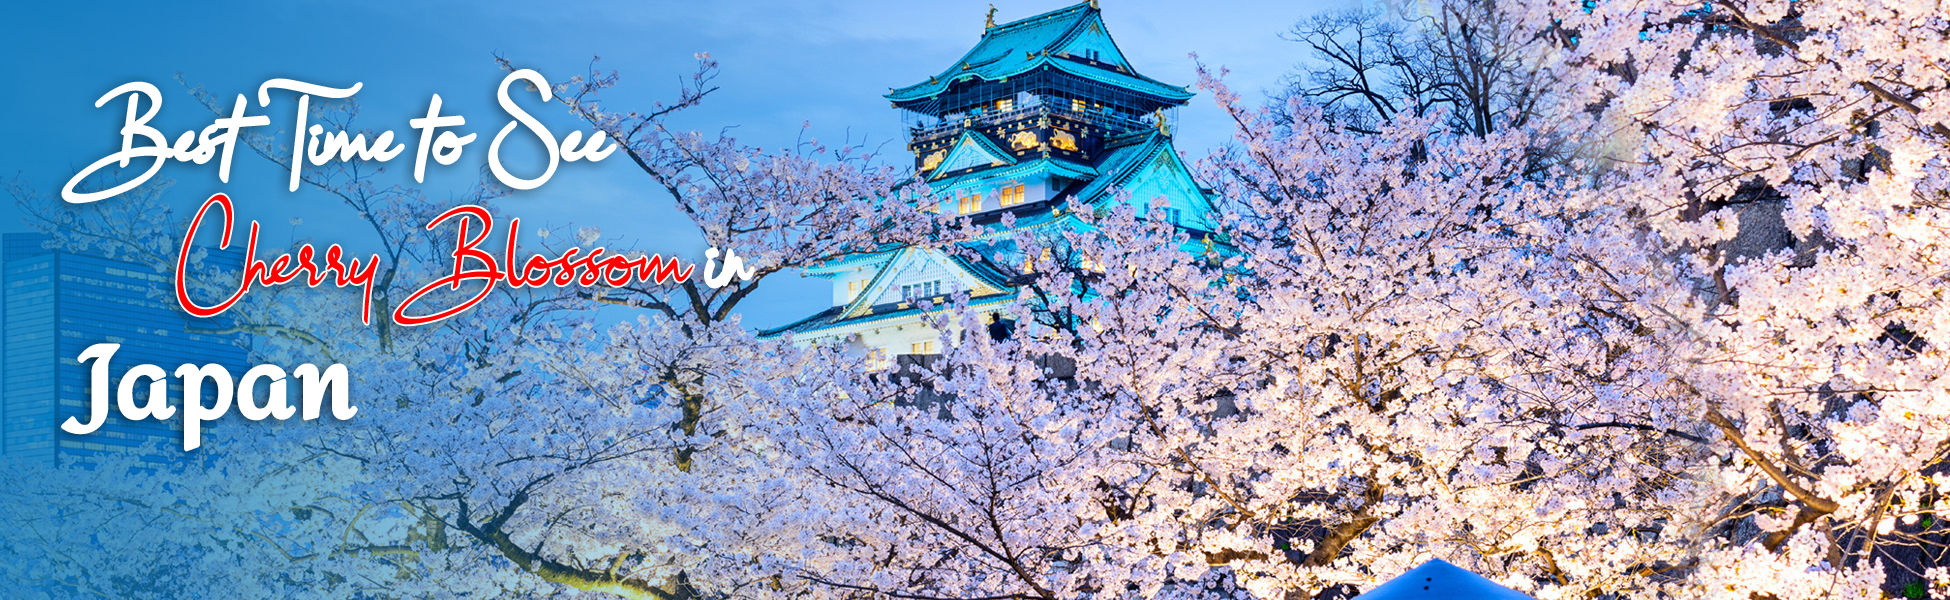 Best Time to See Cherry Blossom in Japan